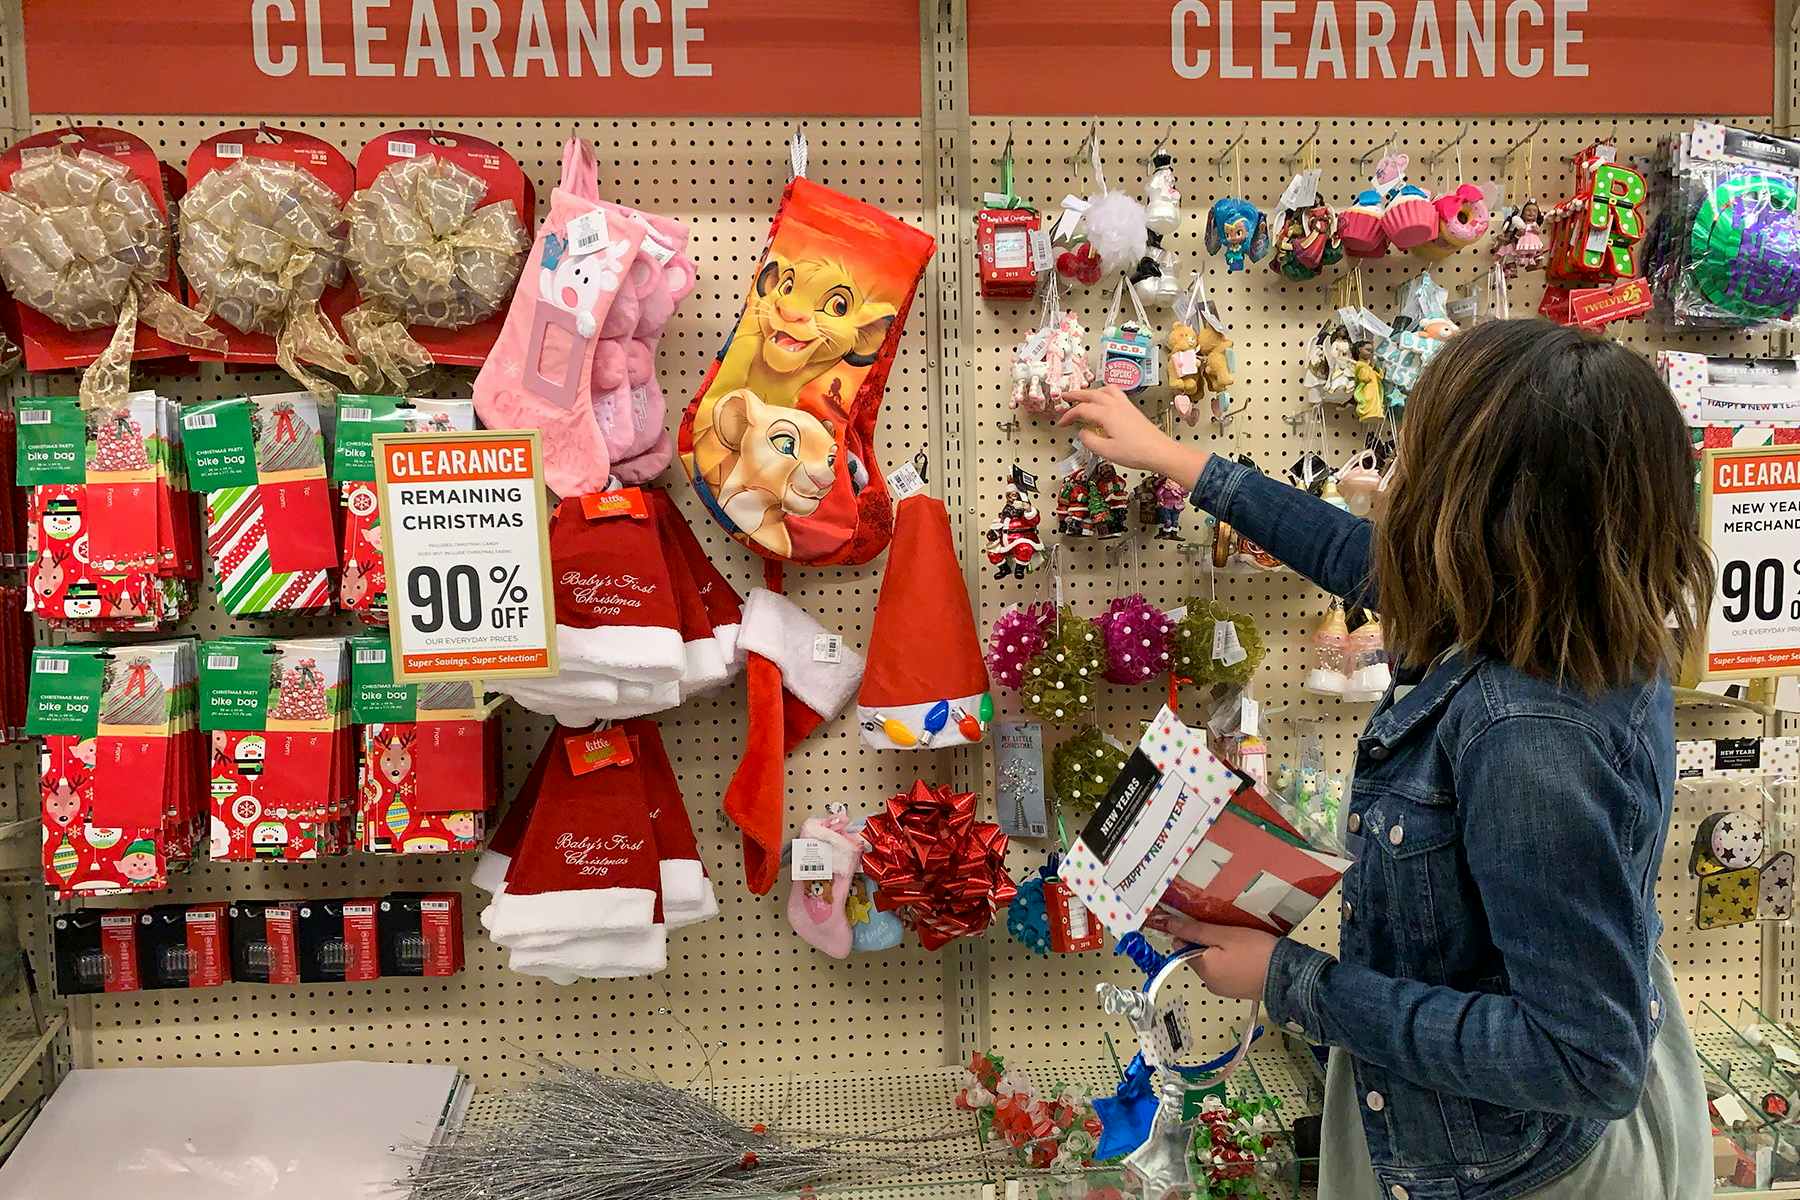 A woman shopping in the Hobby Lobby Christmas clearance section.